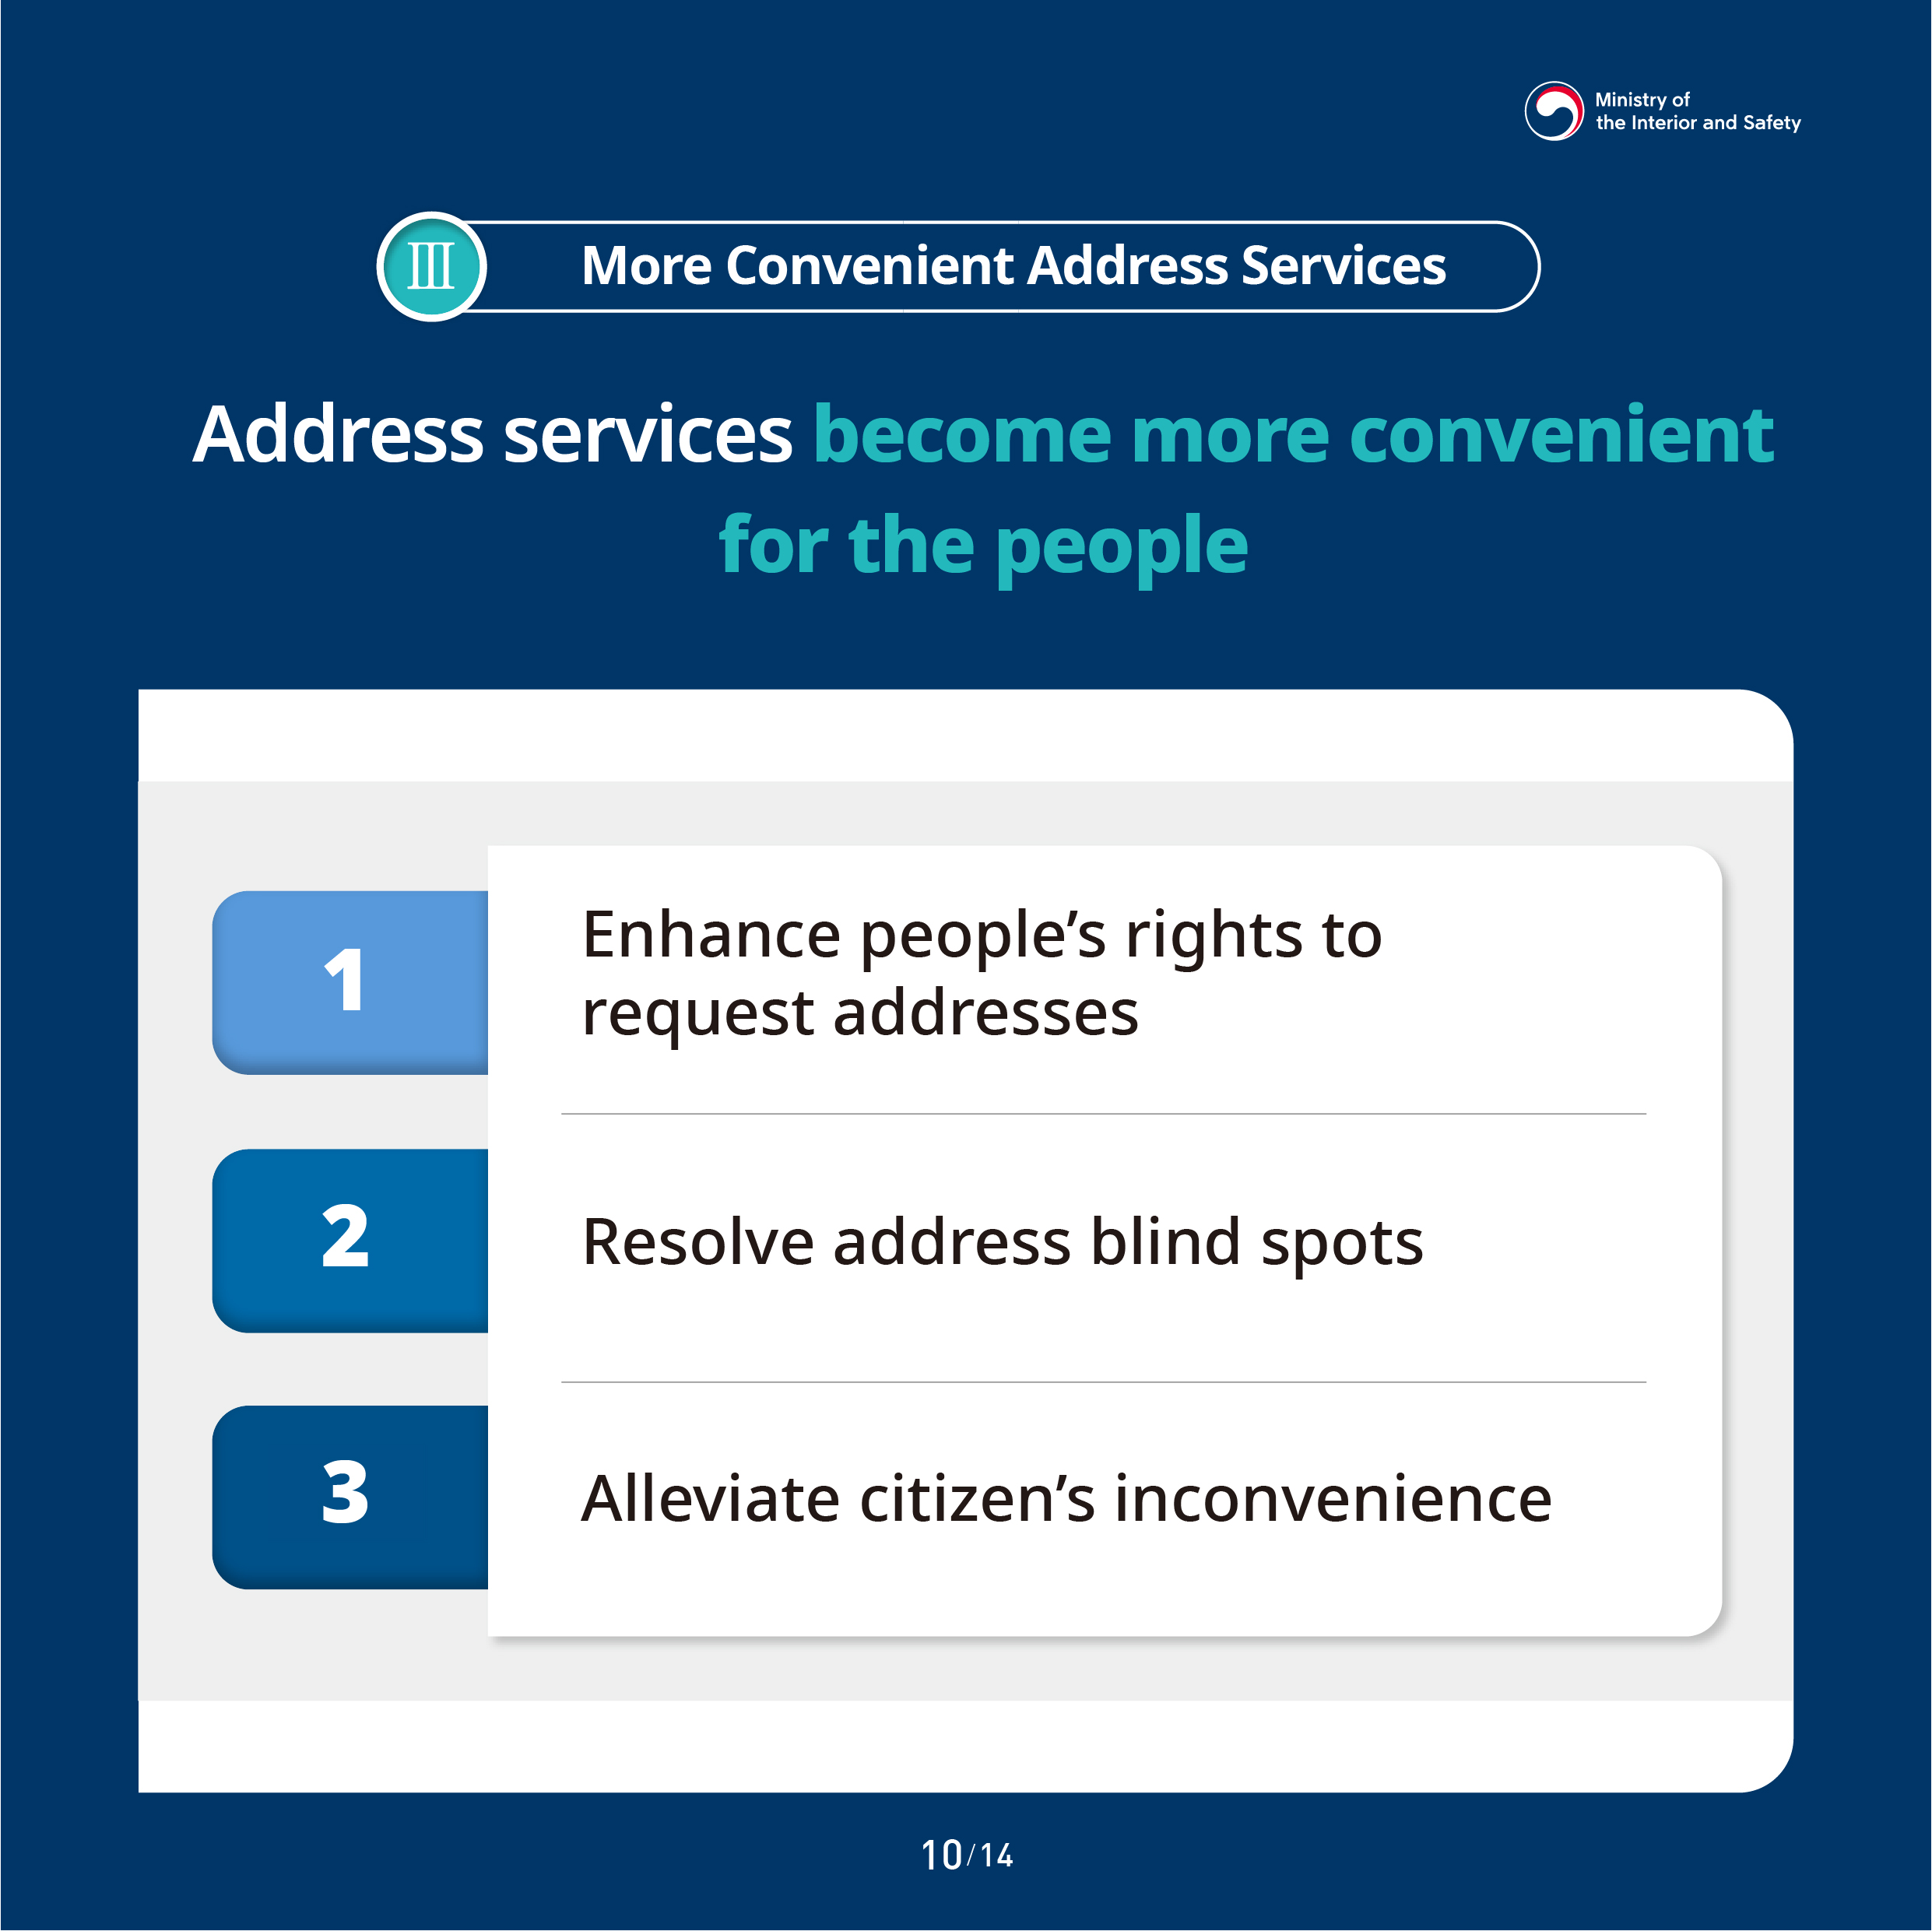 3. More Convenient Address Services. Address services become more convenient for the people. 1: Enhance people's rights to request addresses. 2: Resolve address blind spots. 3: Alleviate citizen's inconvenience.